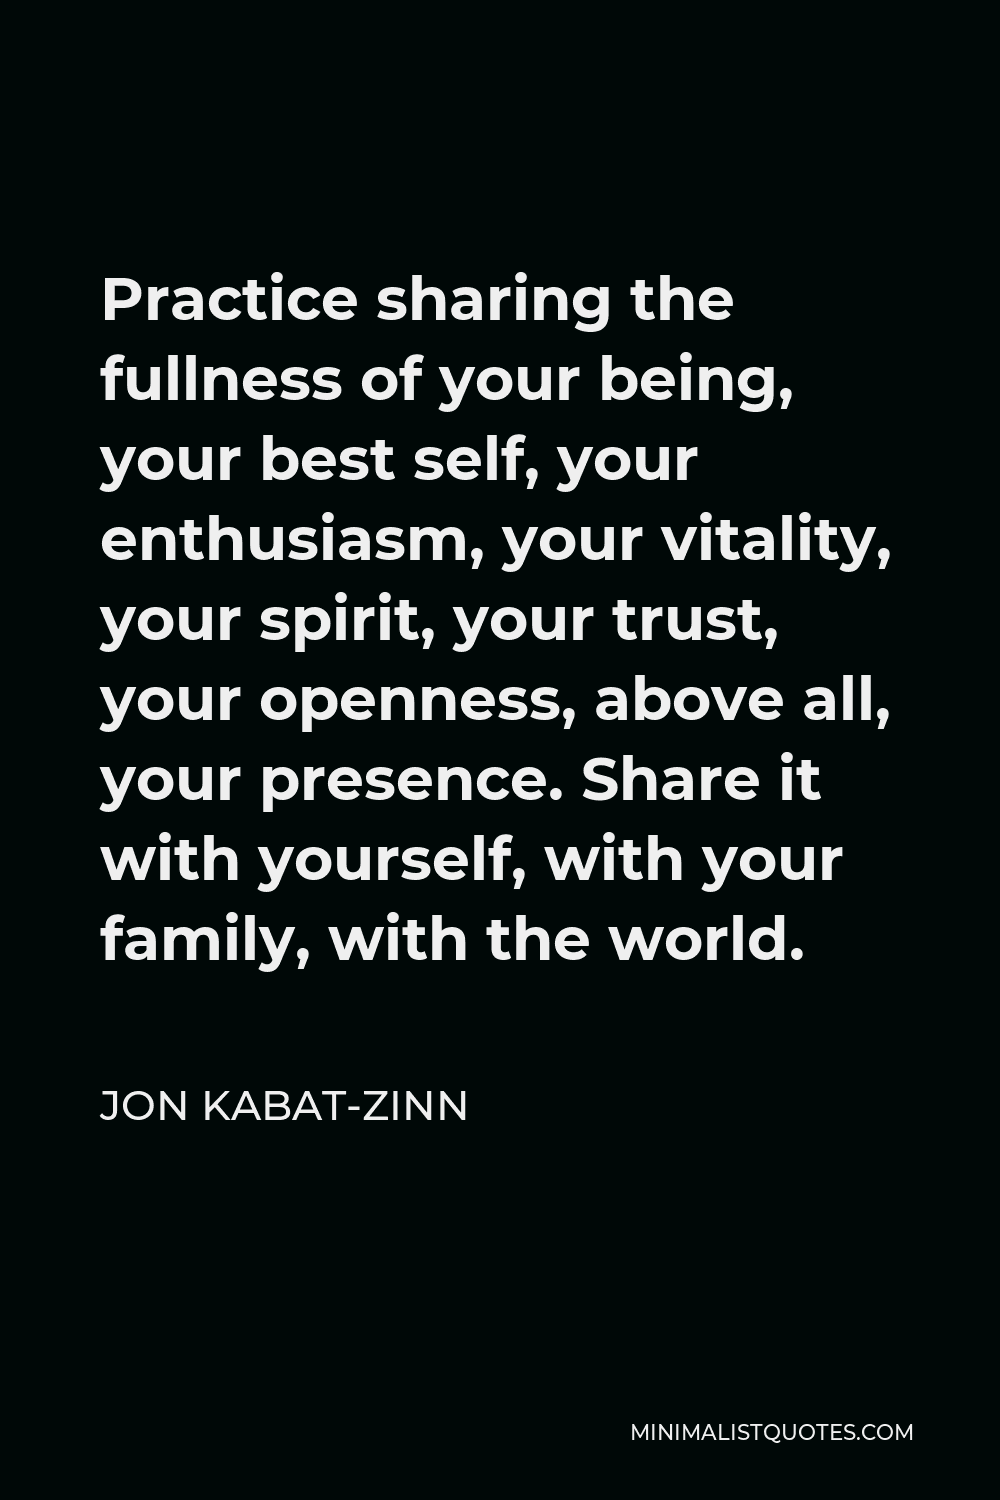 Jon Kabat-Zinn Quote - Practice sharing the fullness of your being, your best self, your enthusiasm, your vitality, your spirit, your trust, your openness, above all, your presence. Share it with yourself, with your family, with the world.